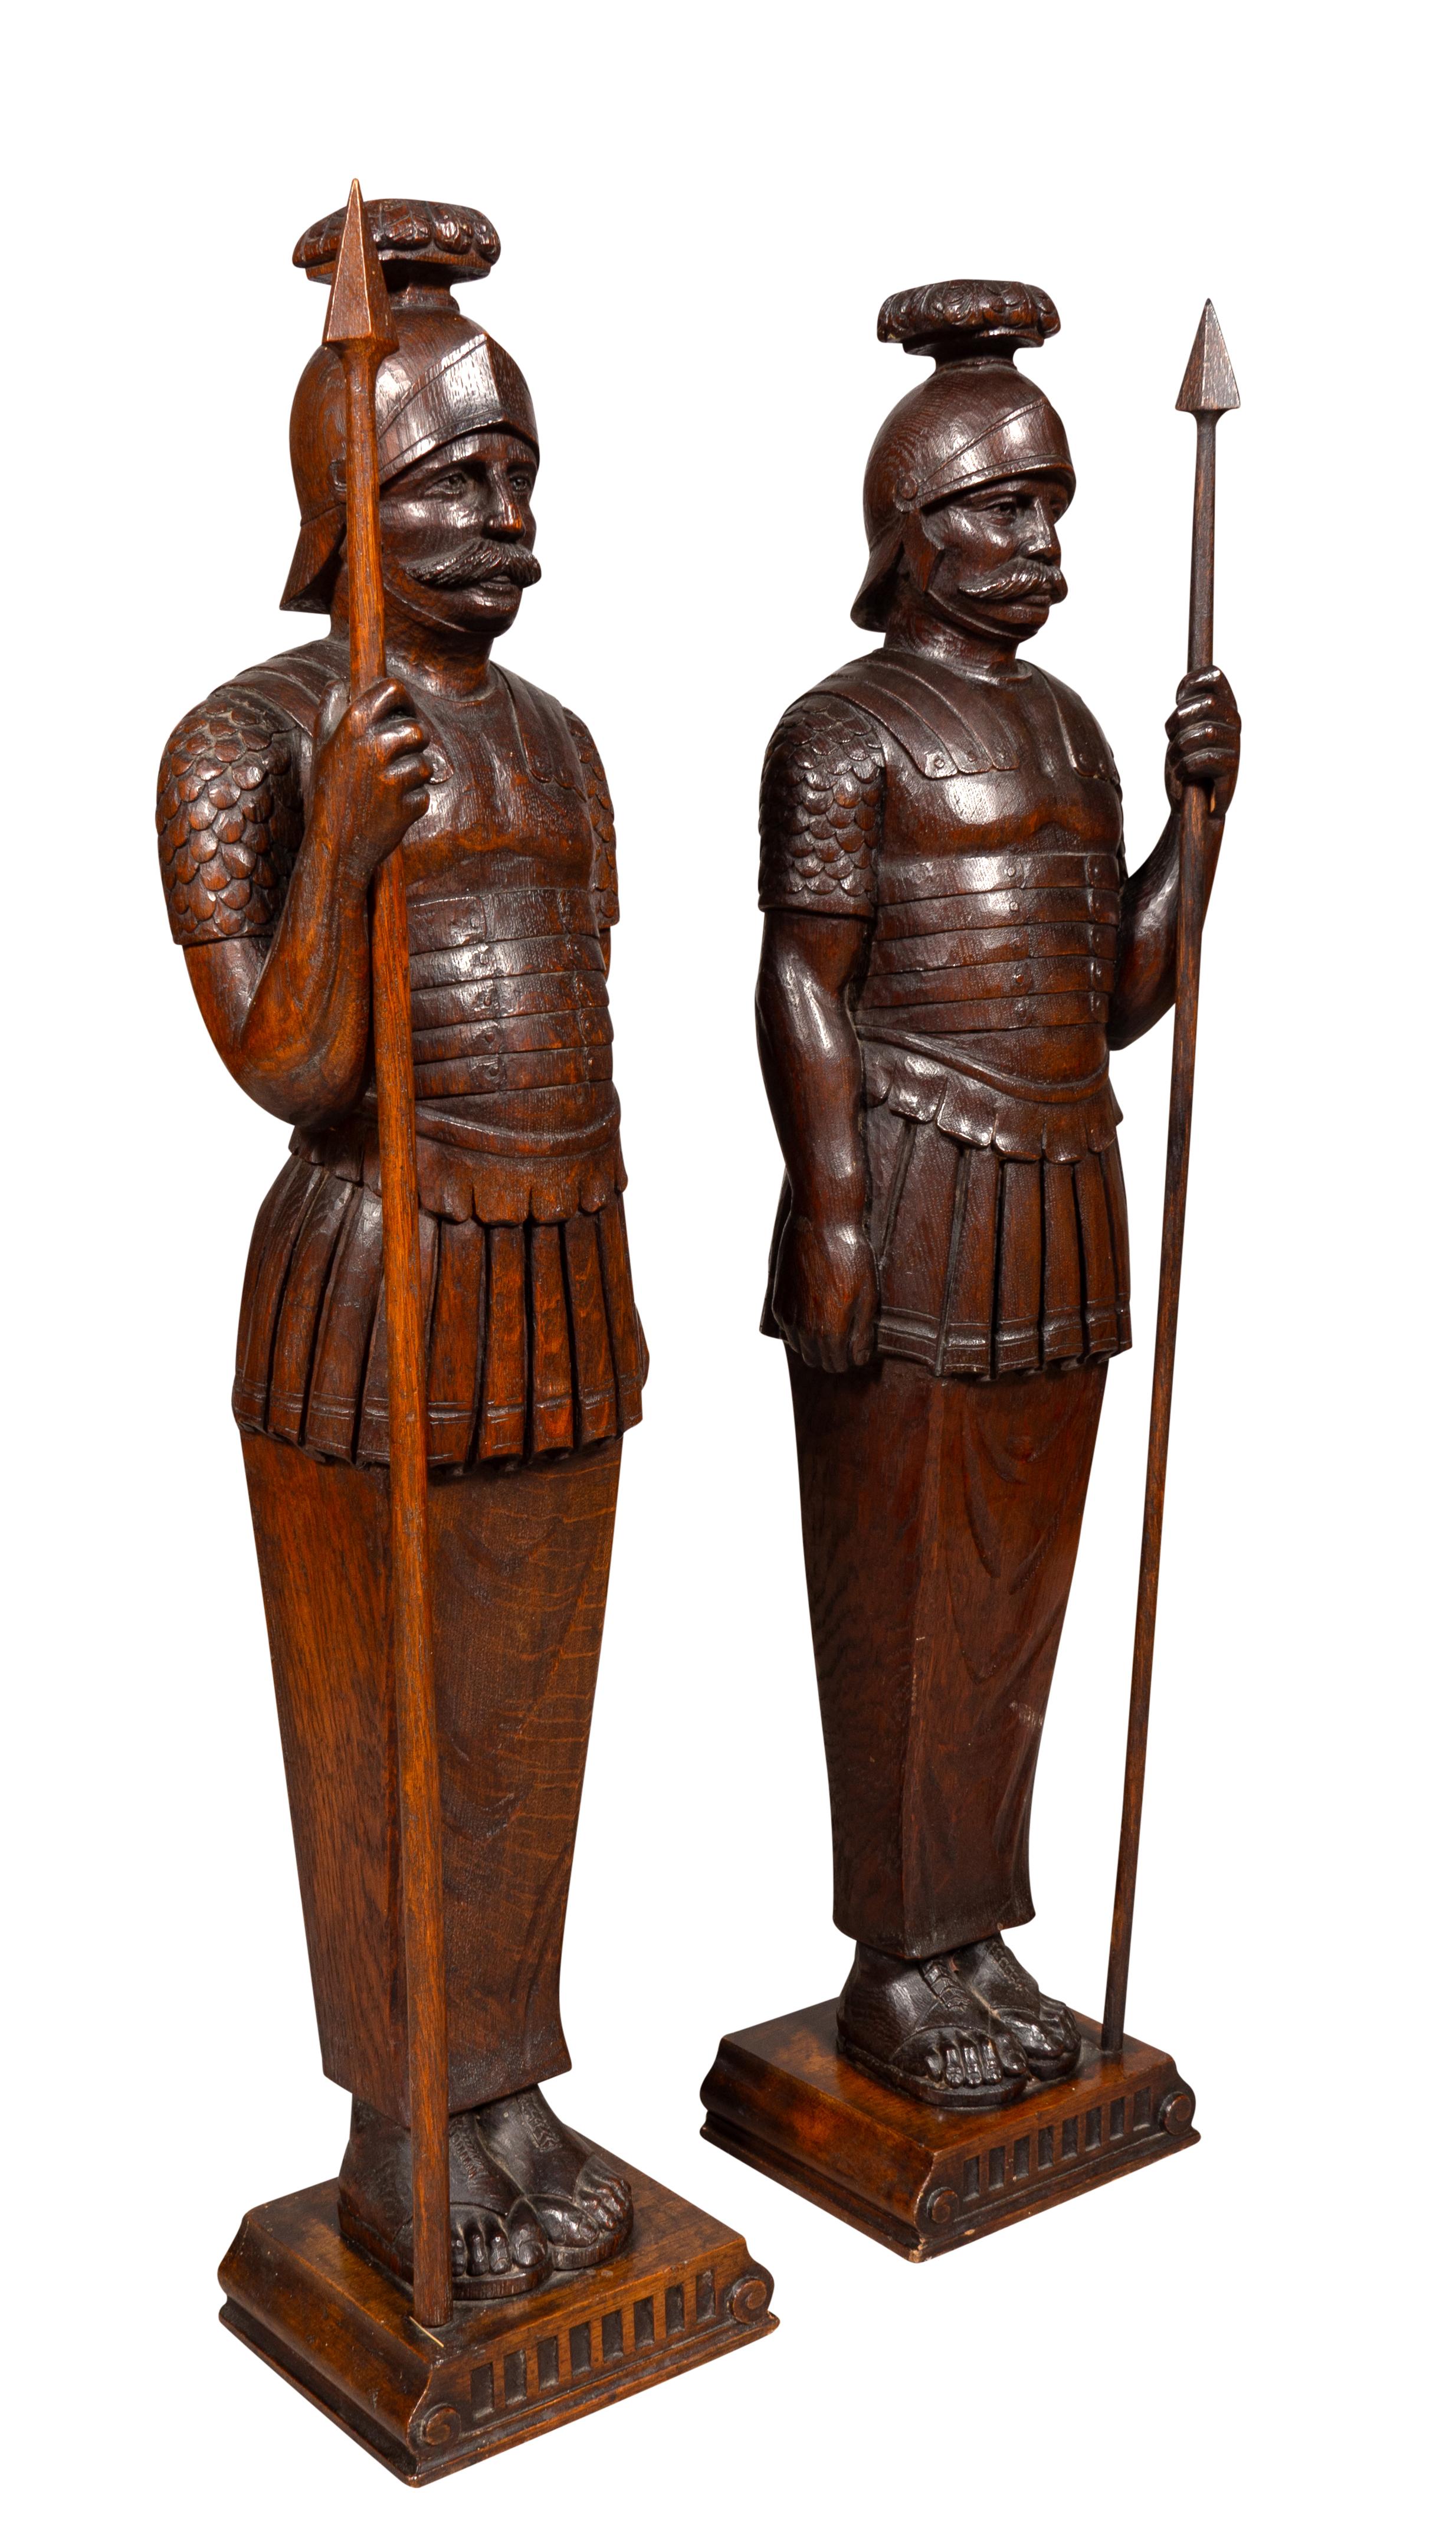 Well carved standing figures holding spears. Amherst Mass collectors estate.